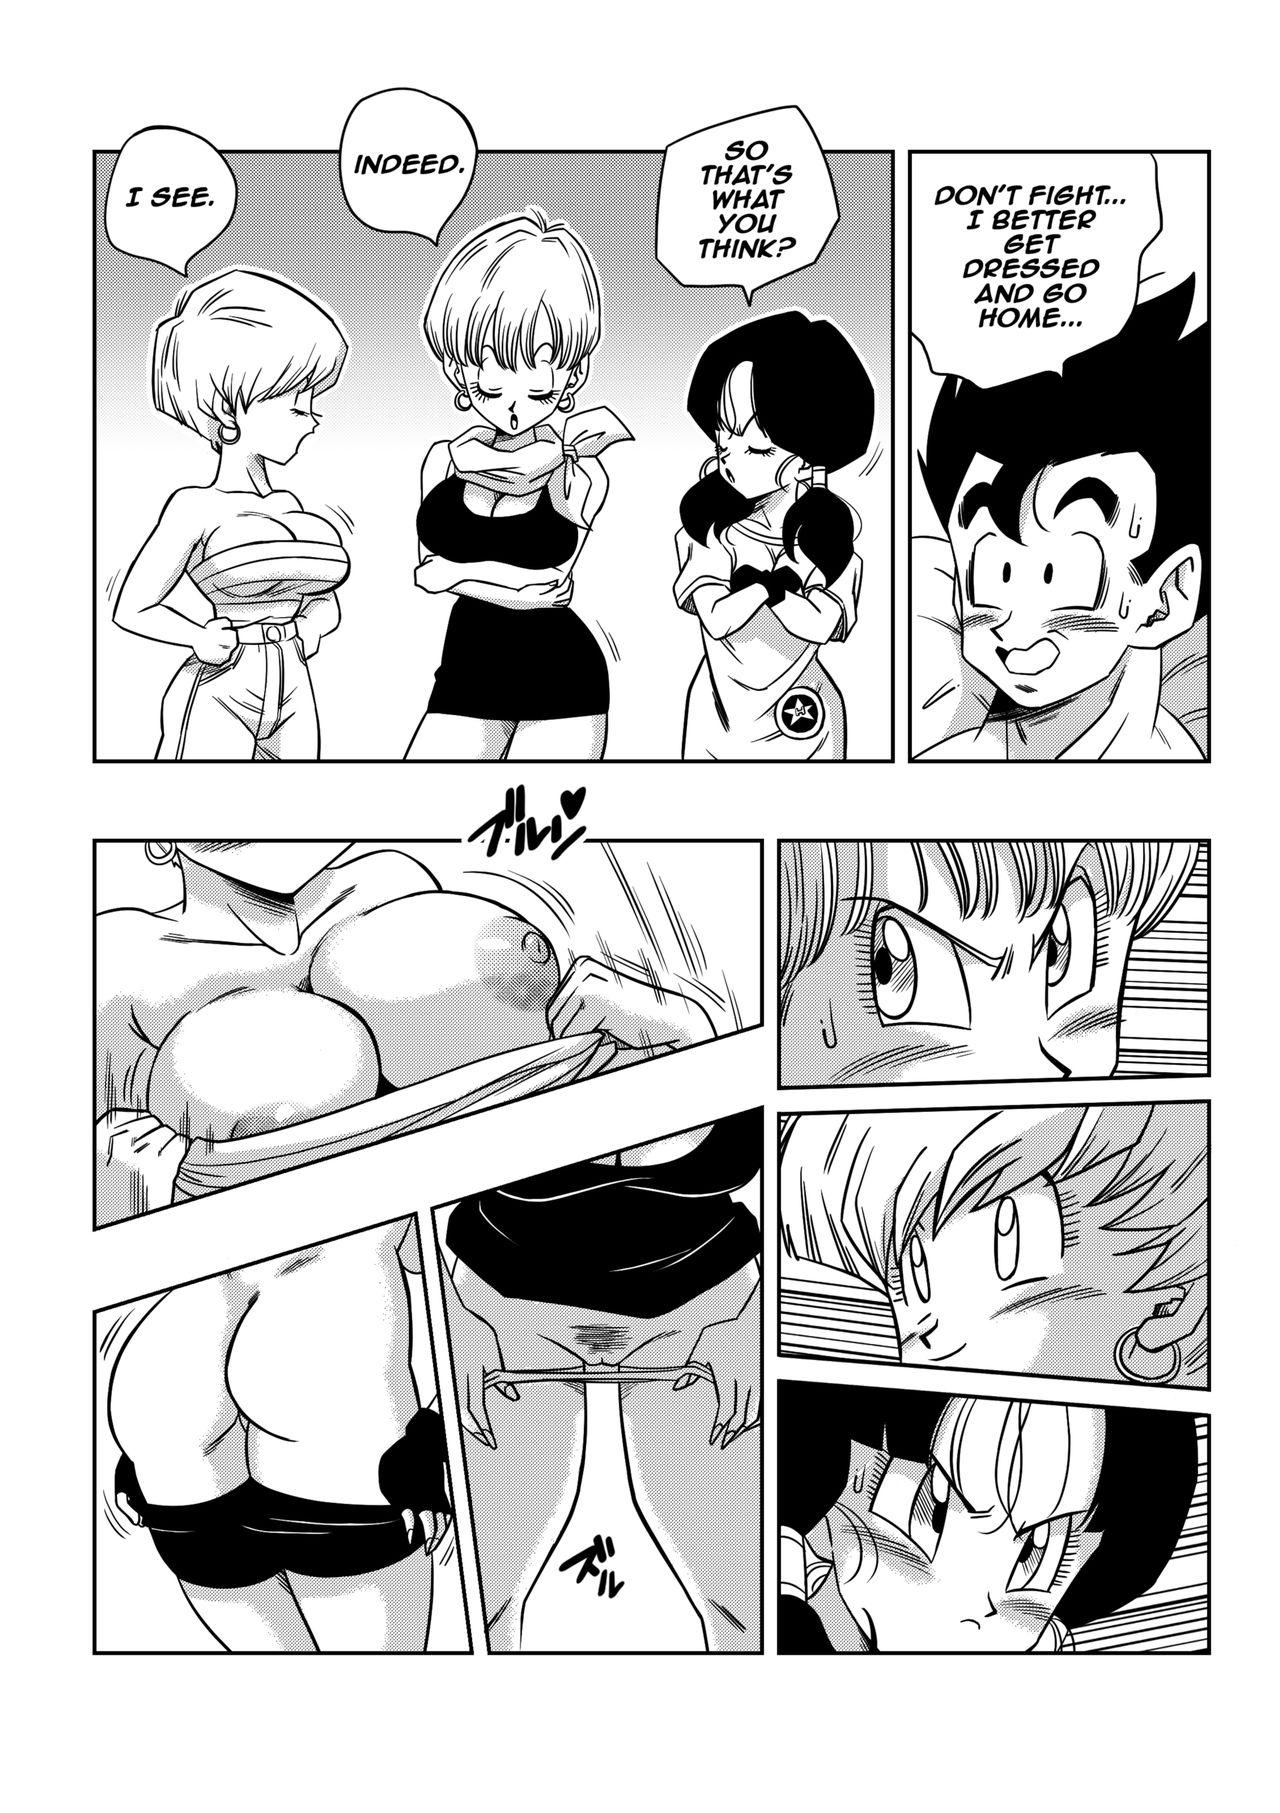 Cock Suck LOVE TRIANGLE Z - Part 4 - Dragon ball z Flogging - Page 10